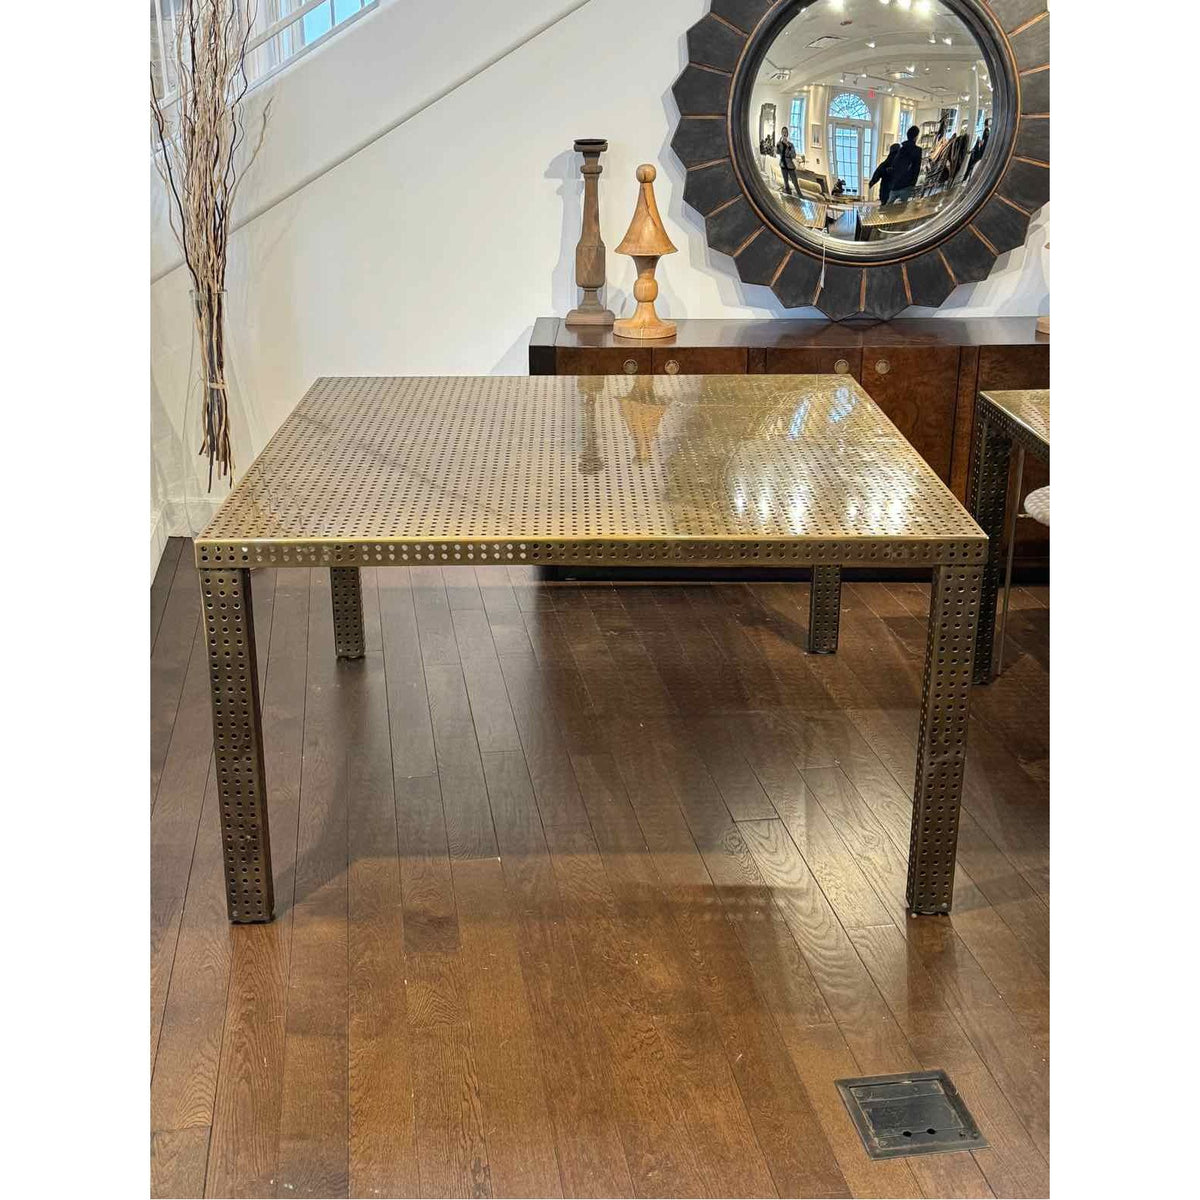 Mategot-Style Perforated Brass Table by Kelly Wearstler 54"Wx54"Dx30"H